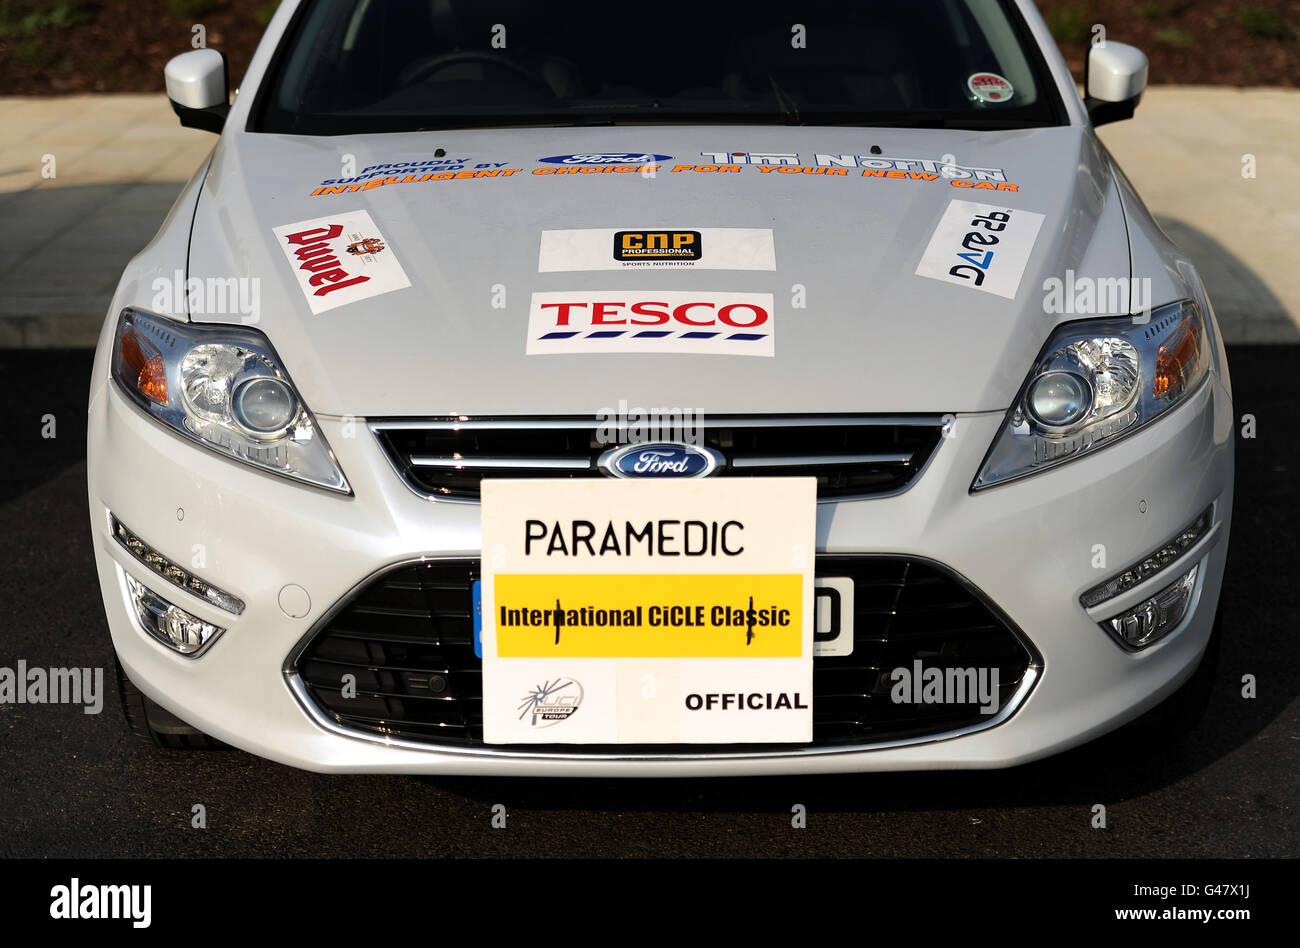 Detailed view of Tesco signage on one of the Official Paramedic cars Stock Photo